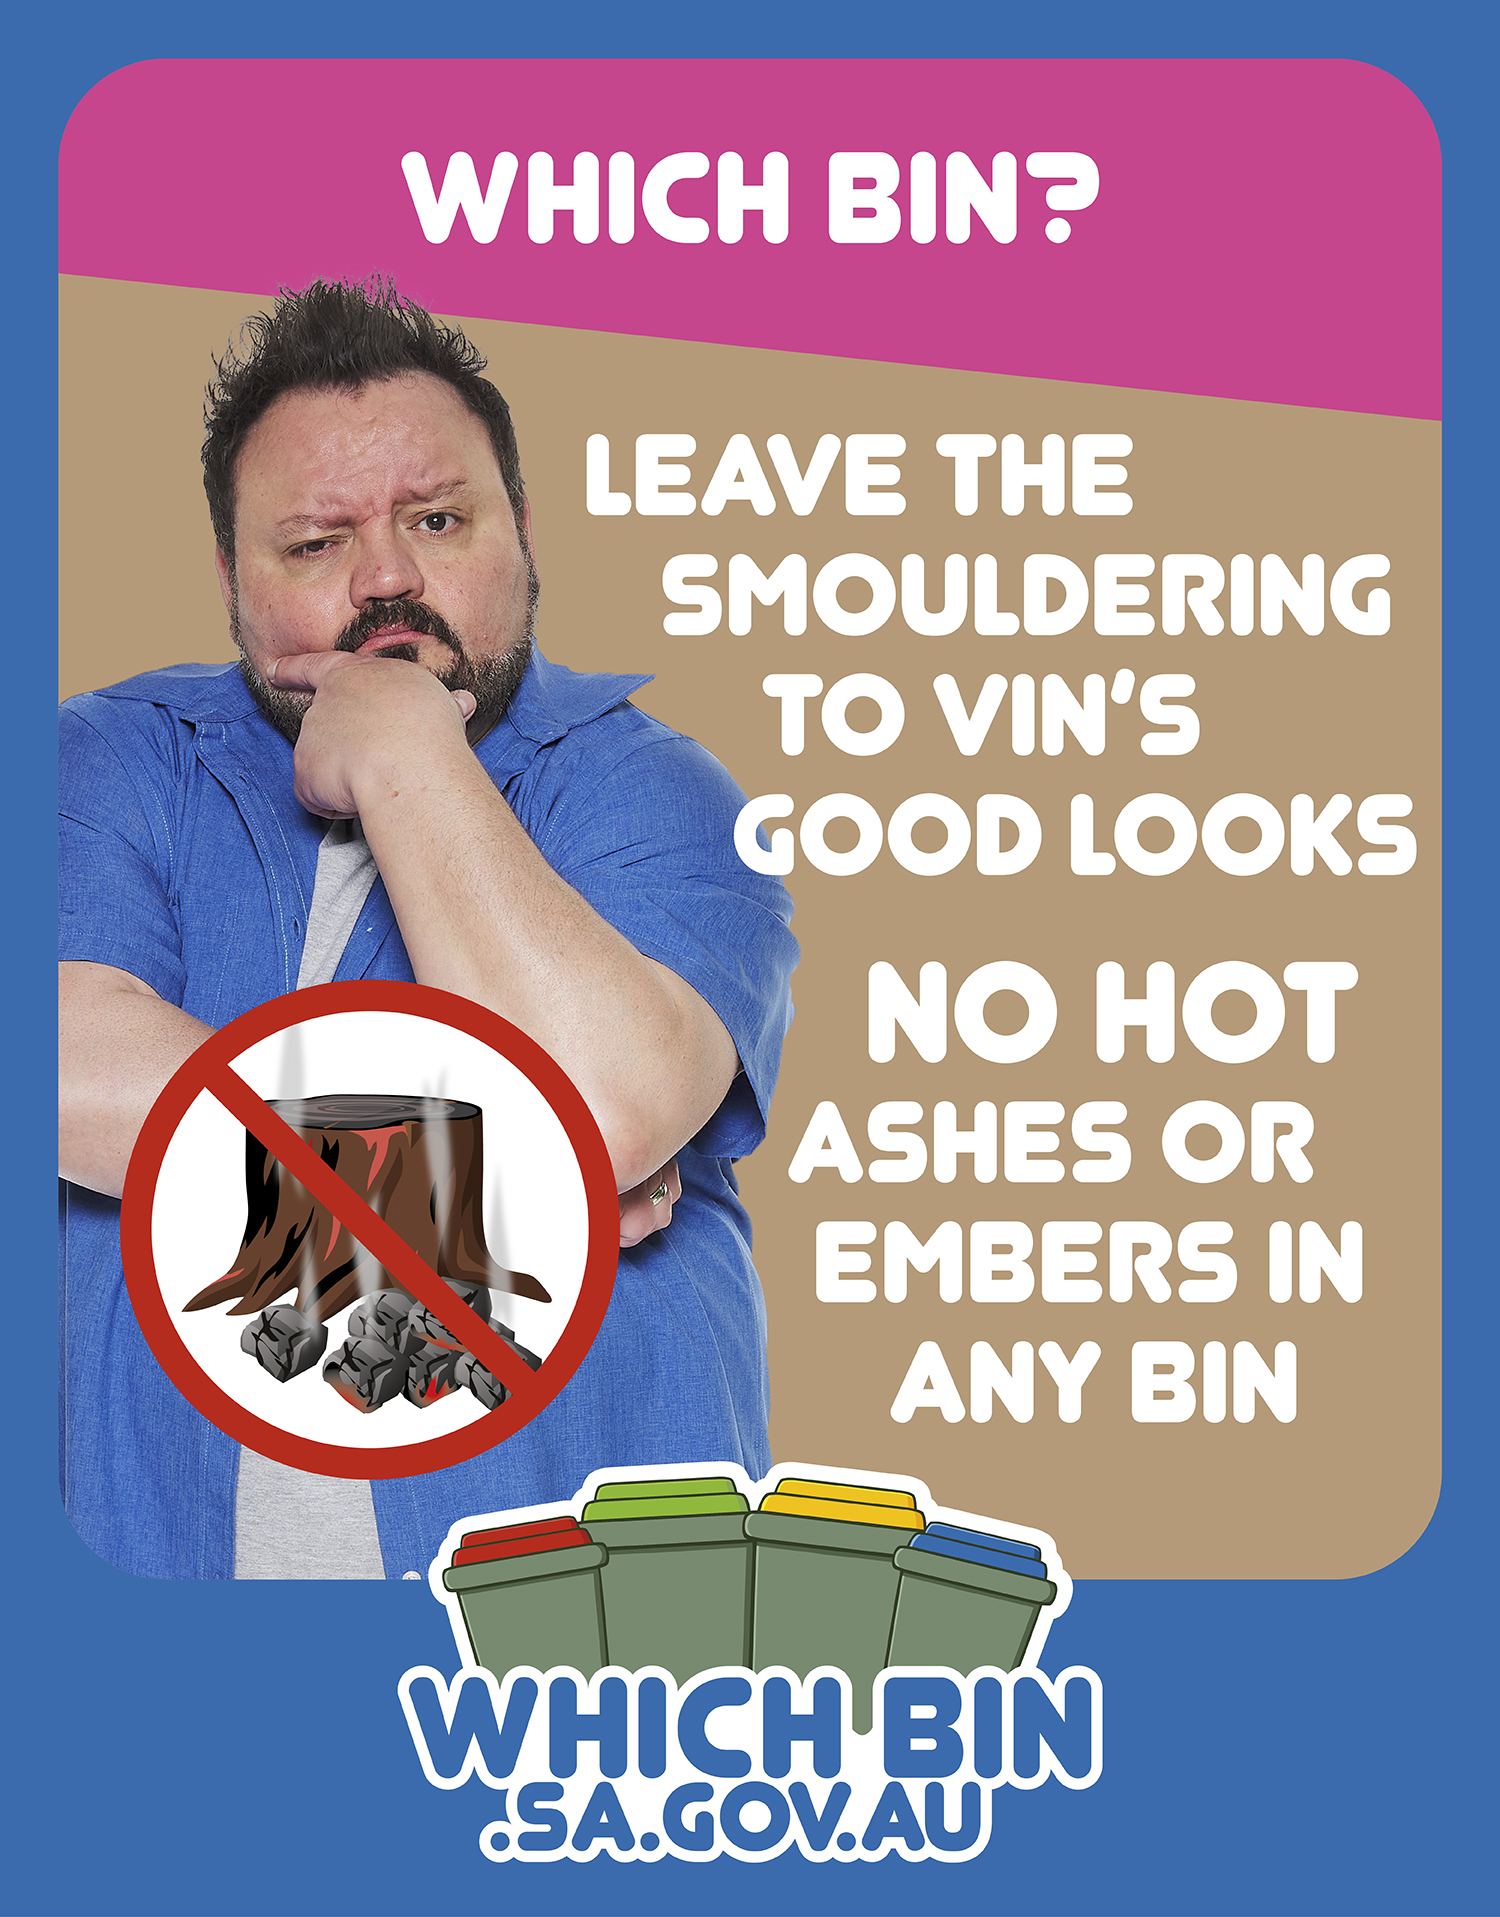 Hot Tip: hot wood is no good in any bin